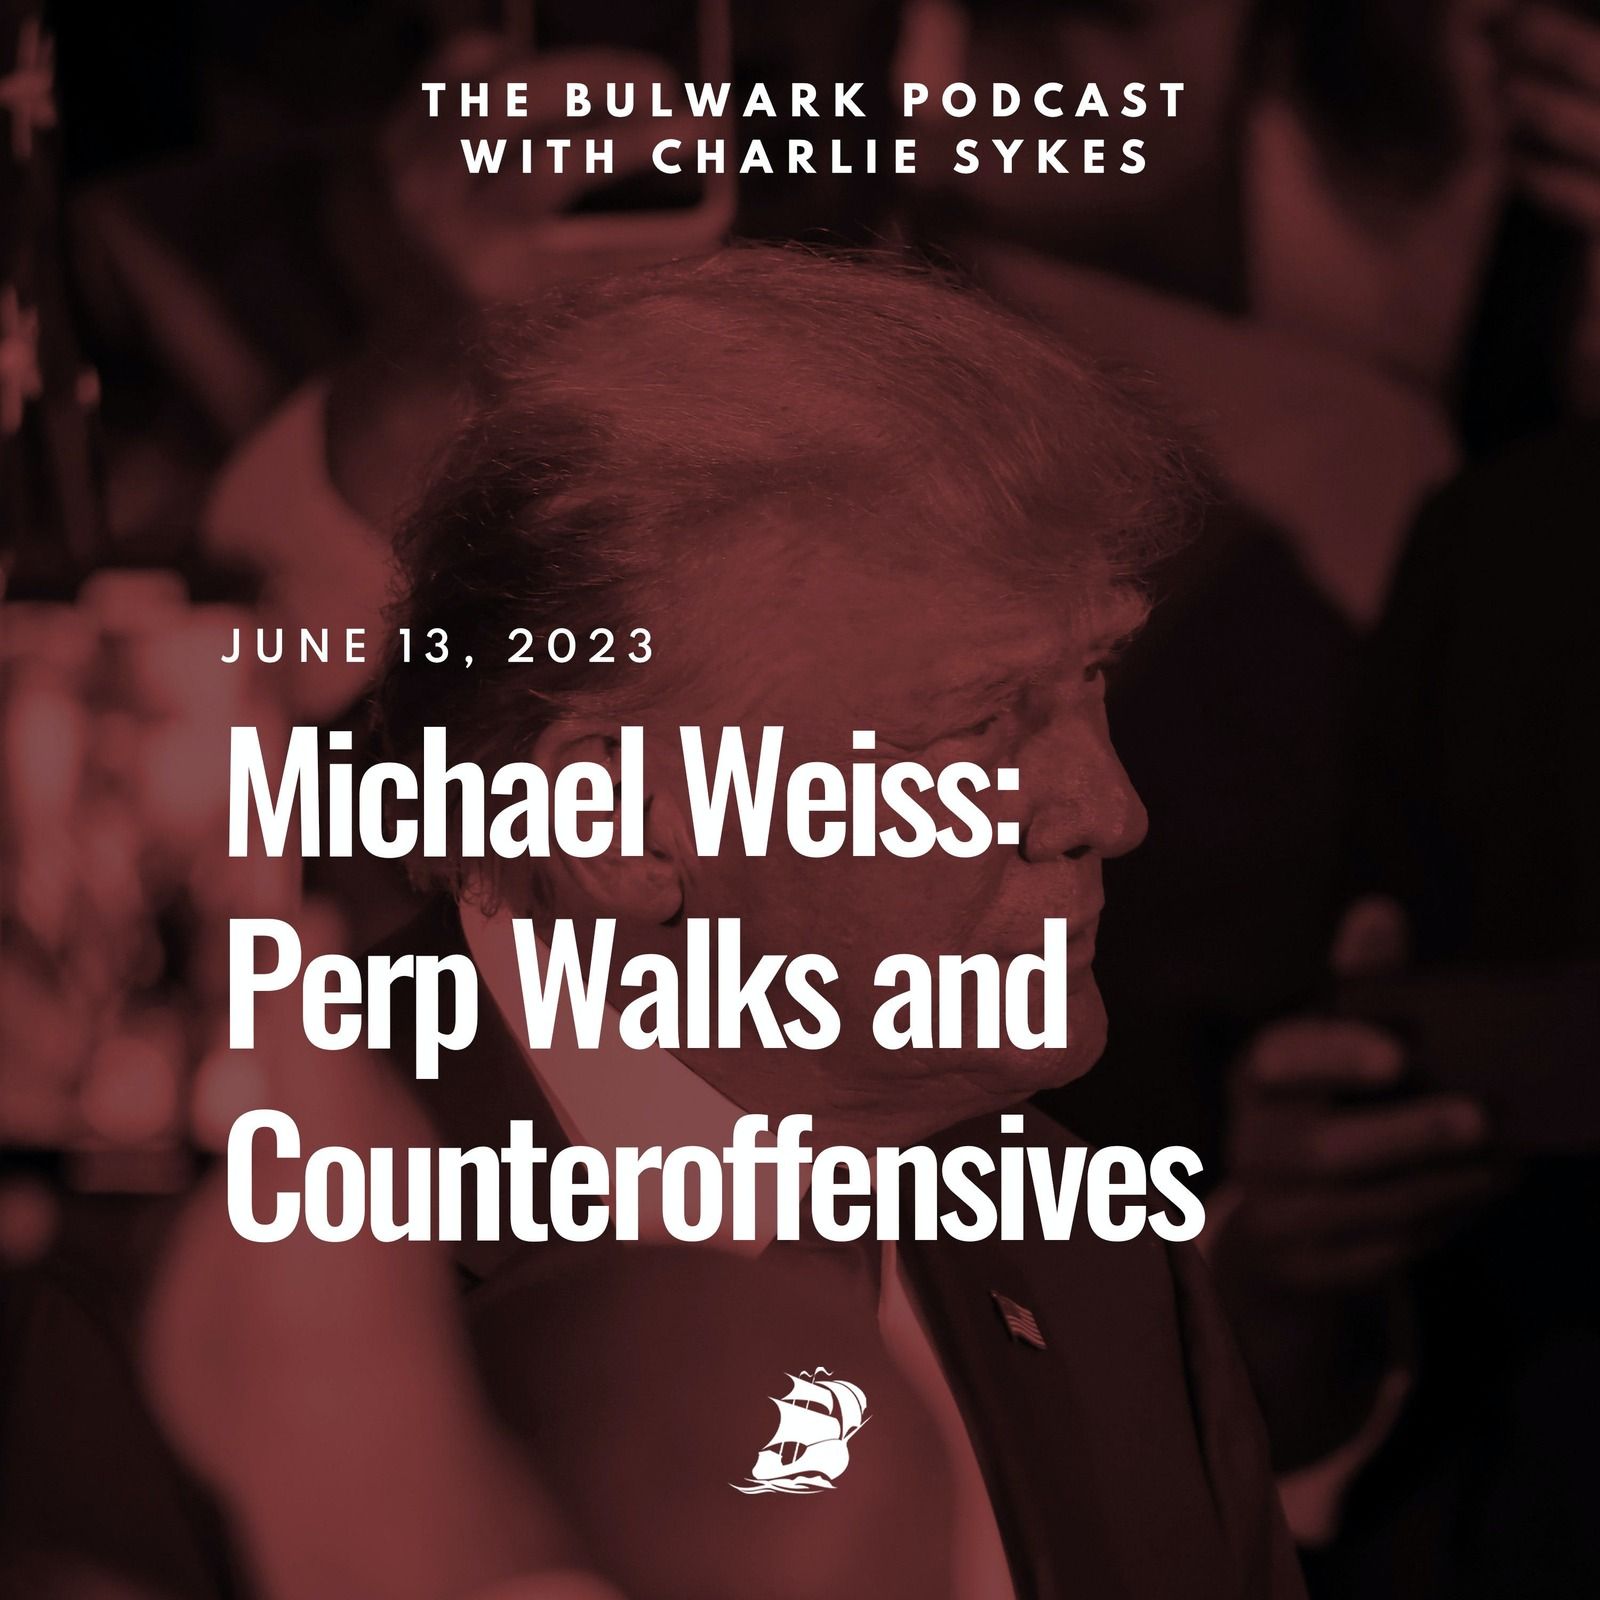 Michael Weiss: Perp Walks and Counteroffensives by The Bulwark Podcast